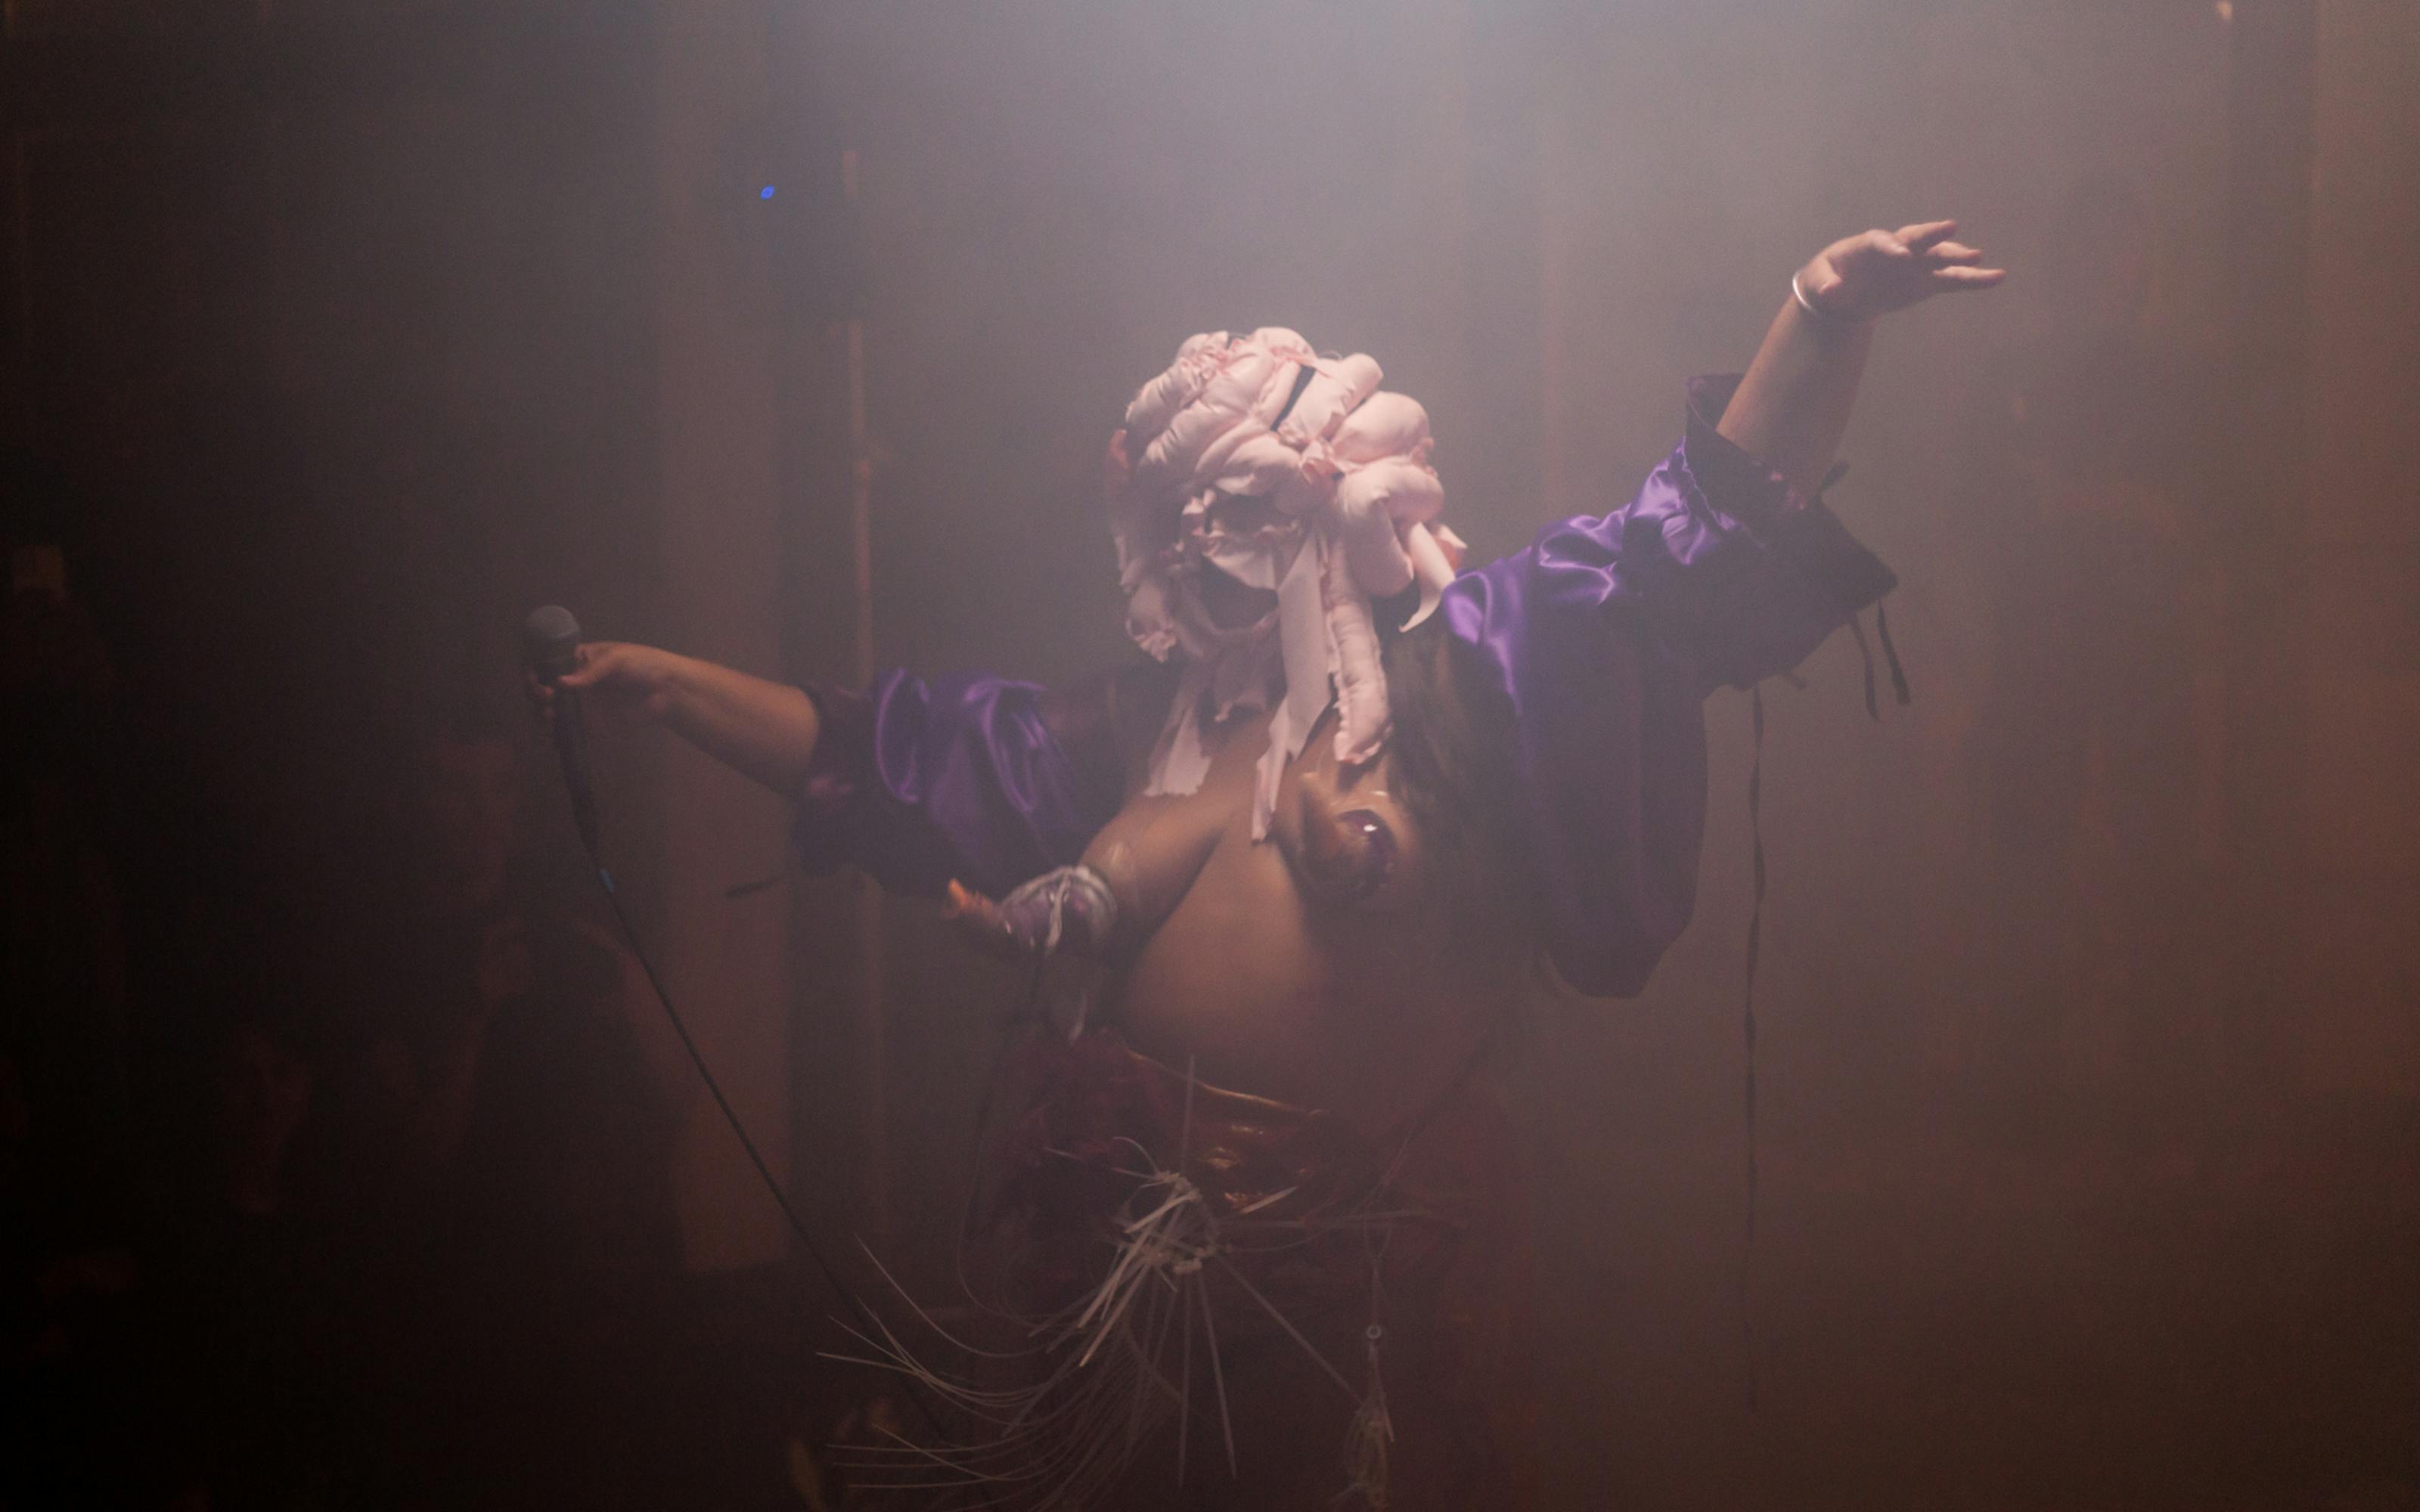 French artist BORA performs at Signals Festival 2021 with performers Romeo & Hellion | Photograph by Ian Margio